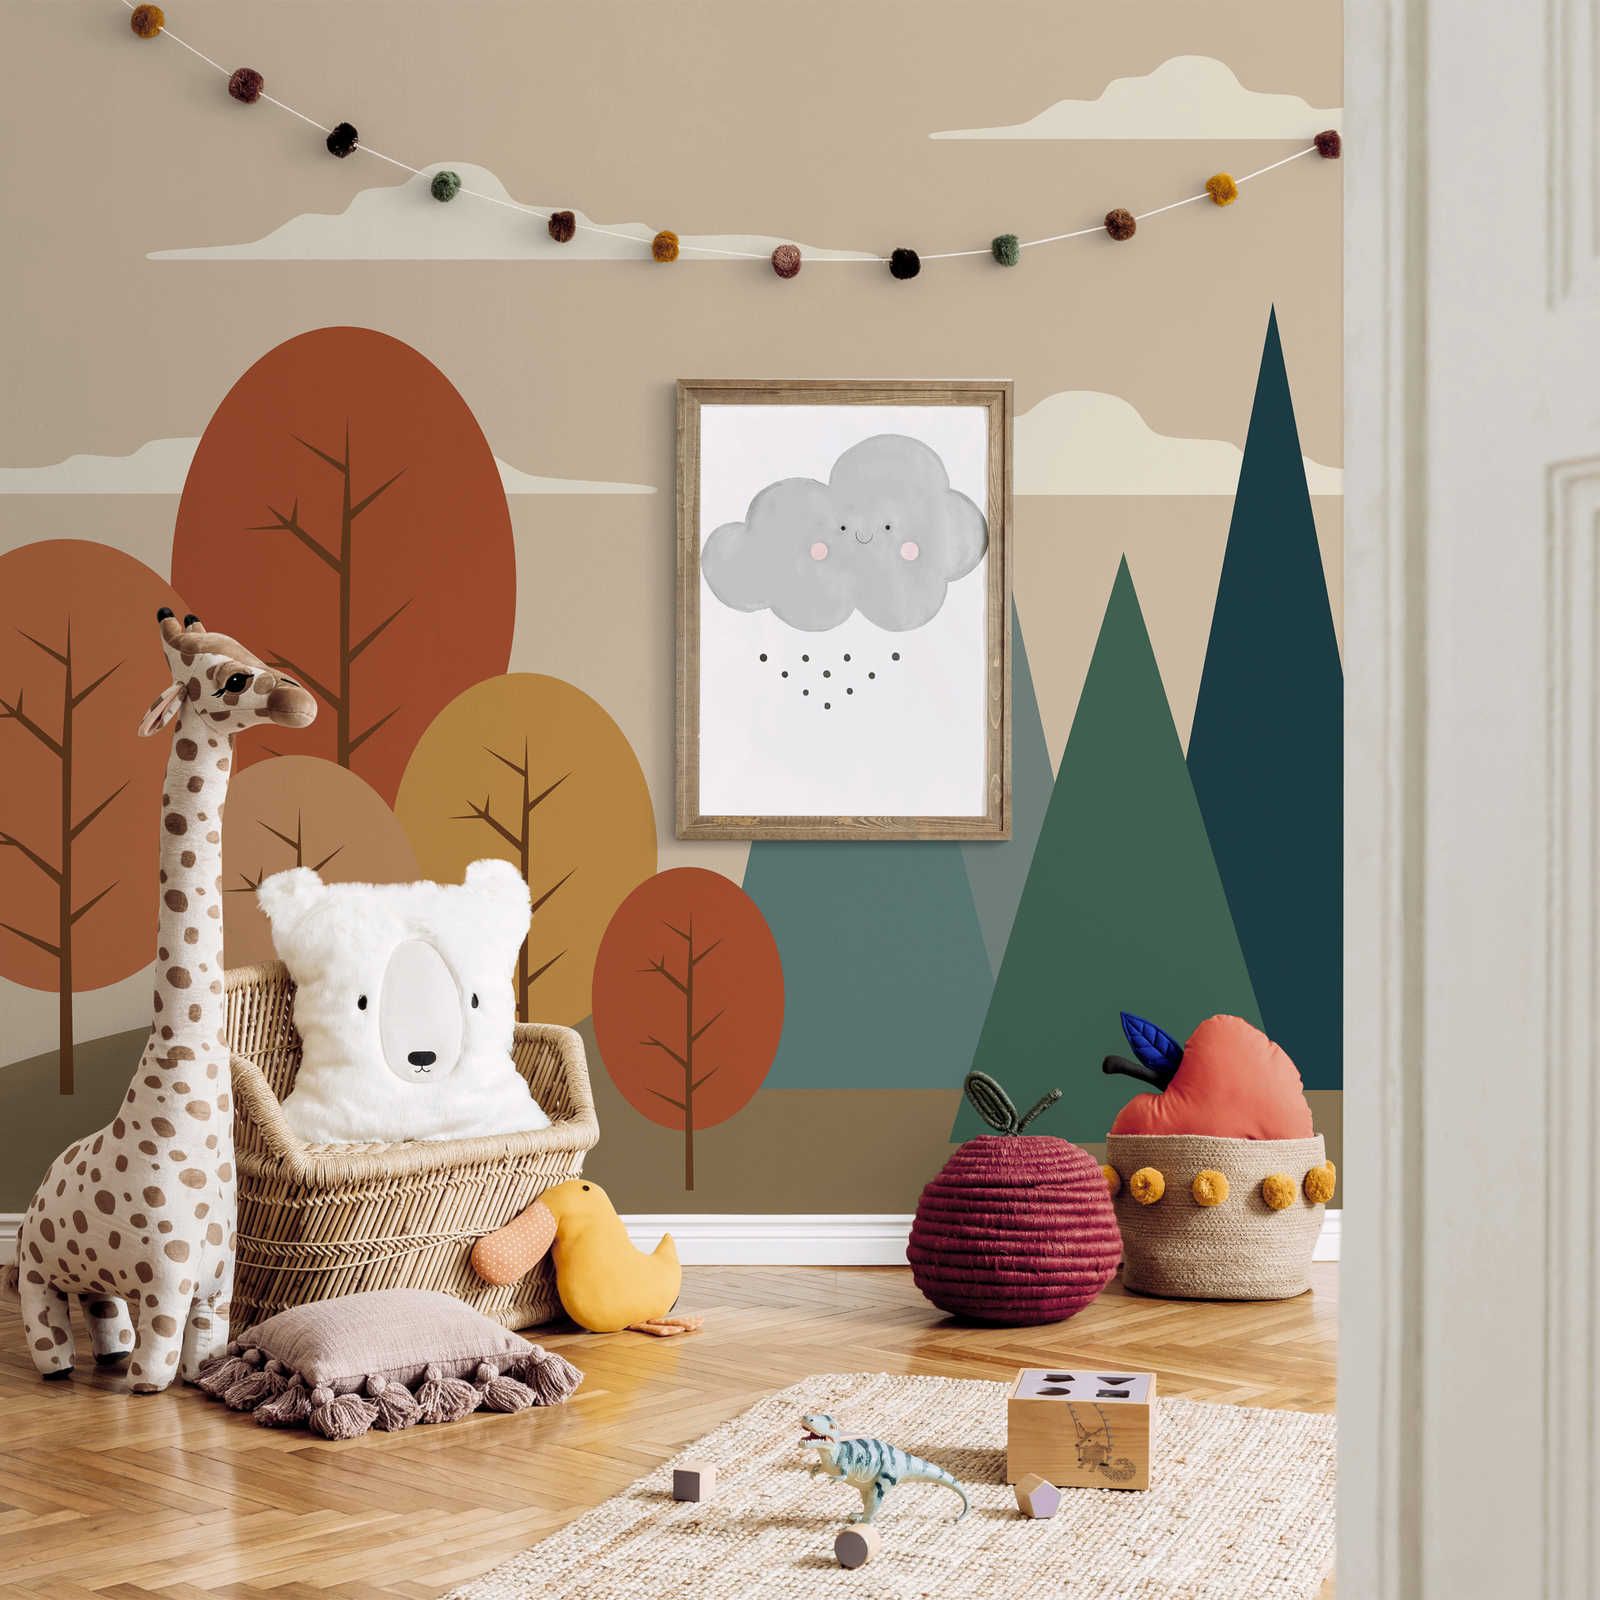 Photo wallpaper Enchanted Forest with Geometric Shapes - Textured non-woven
